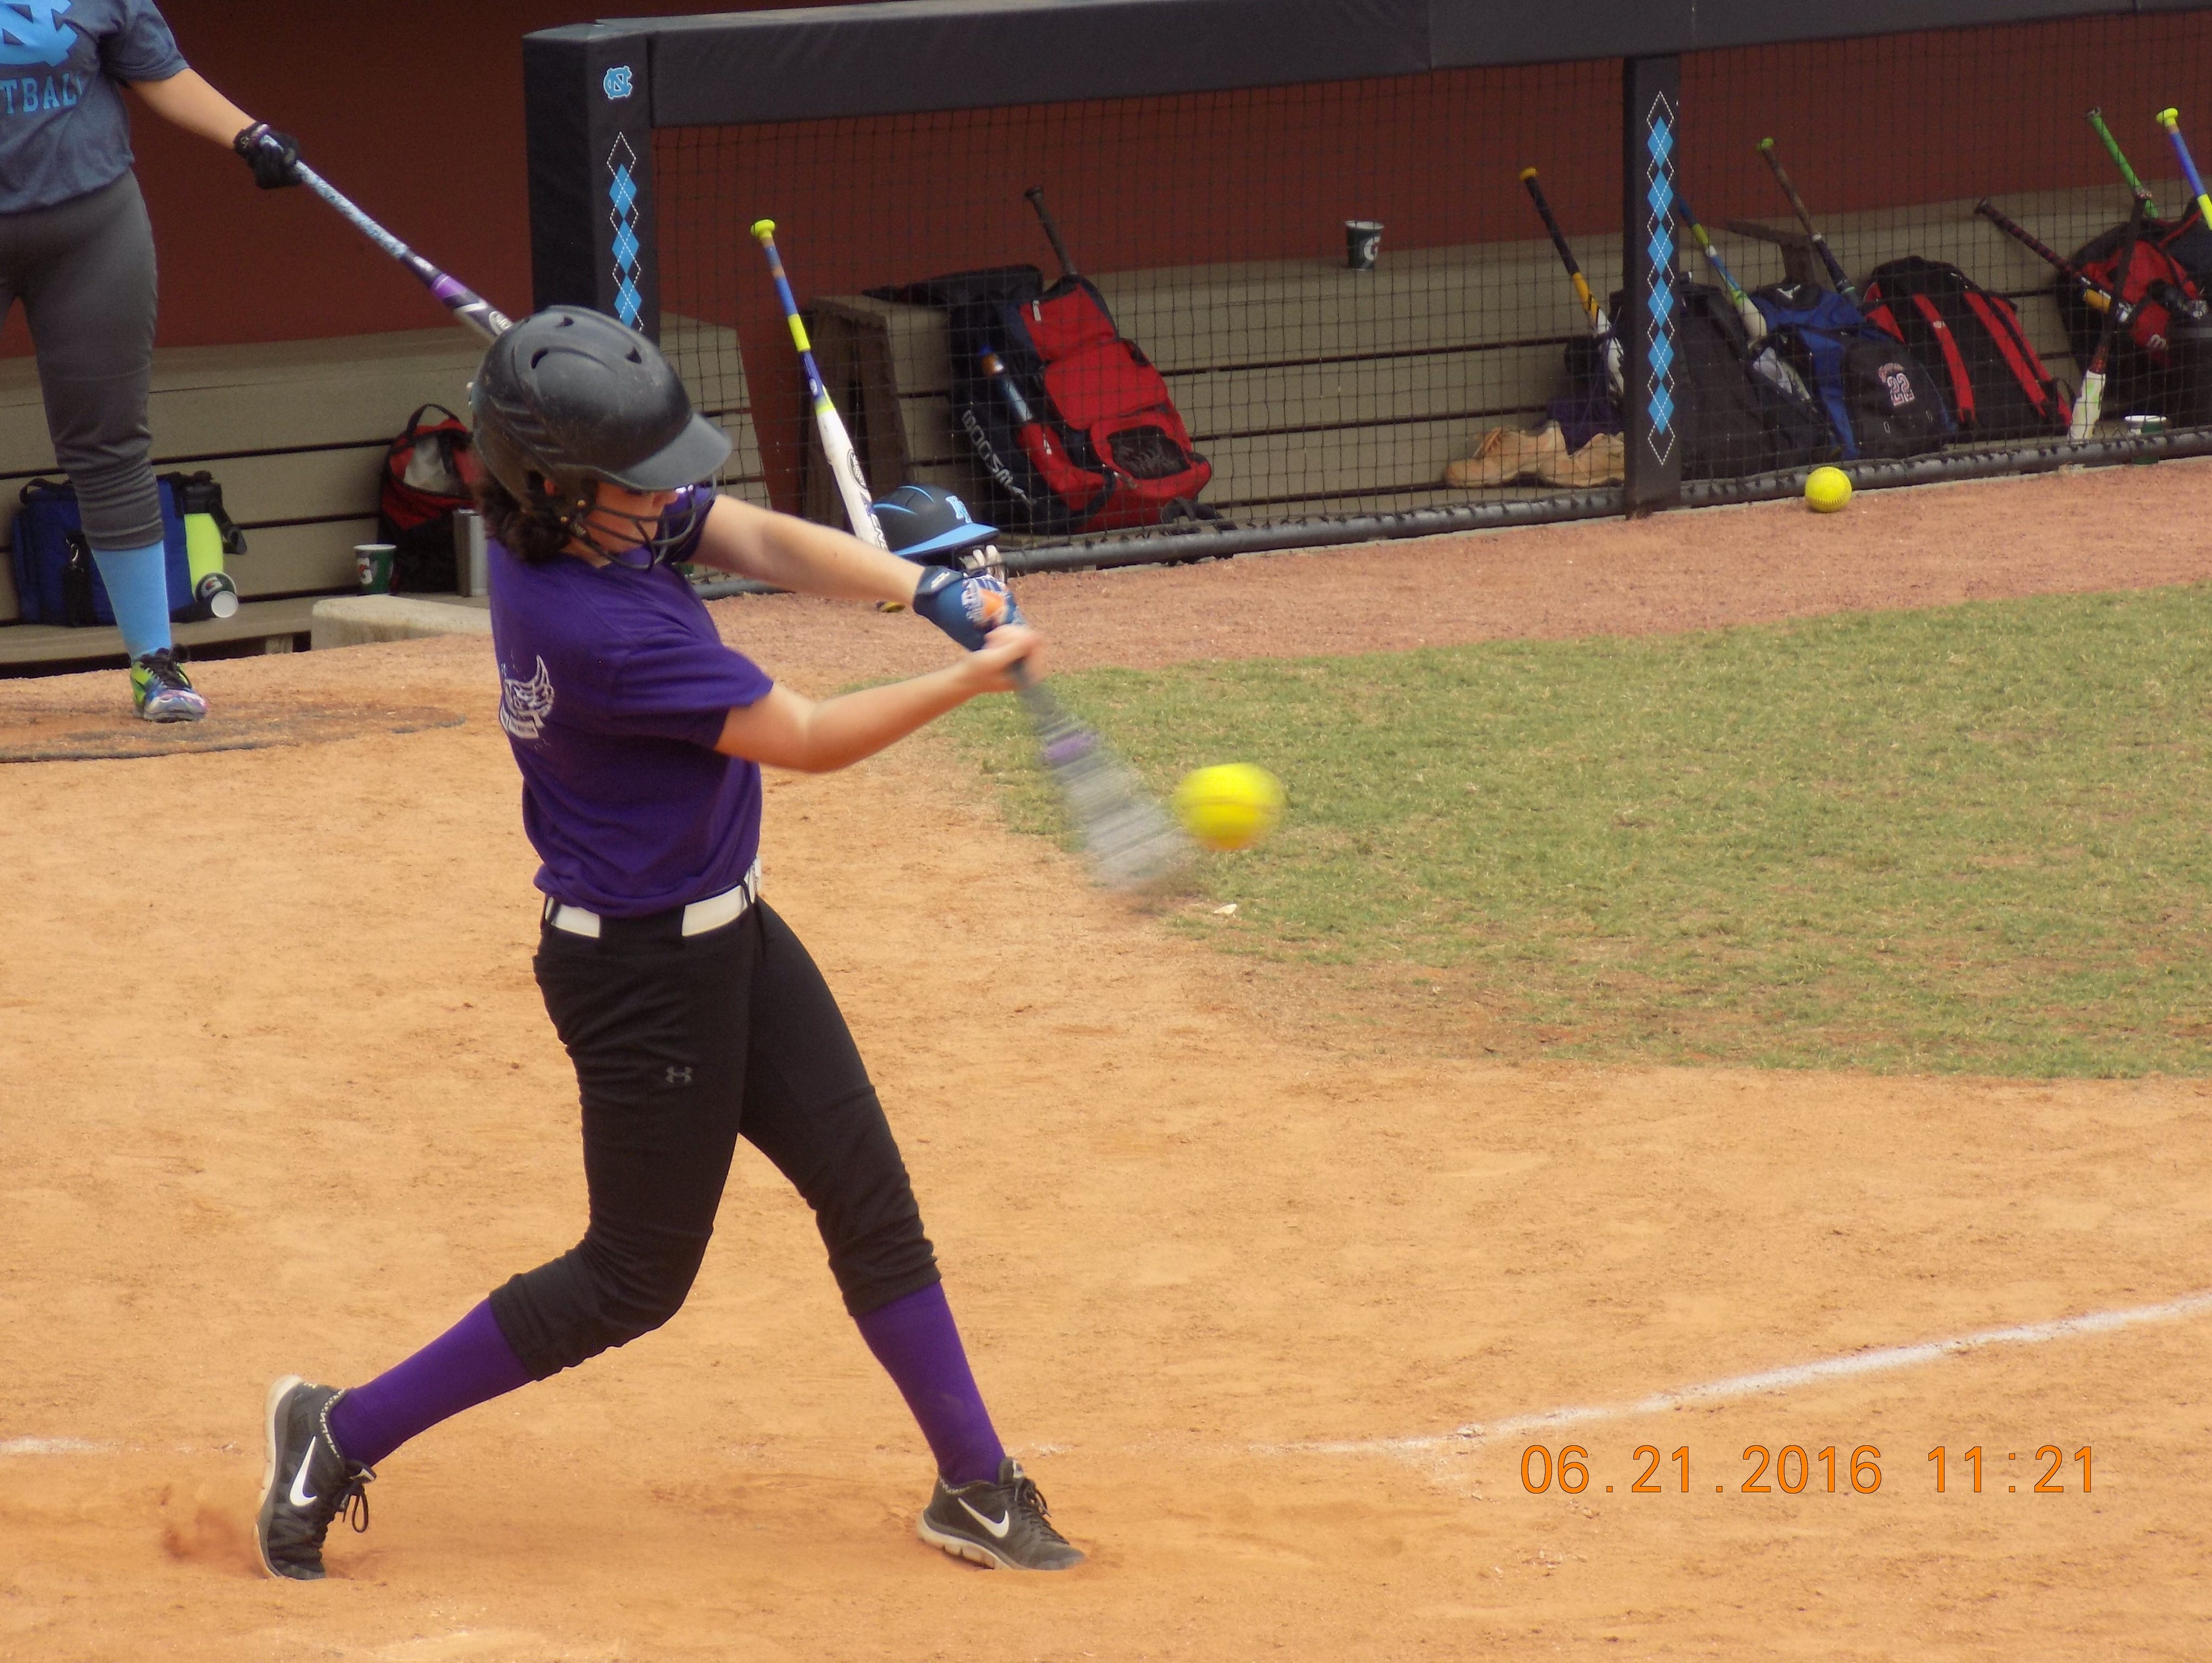 Kyleigh Roland batted .650 for the Reynolds Middle softball team this past season.